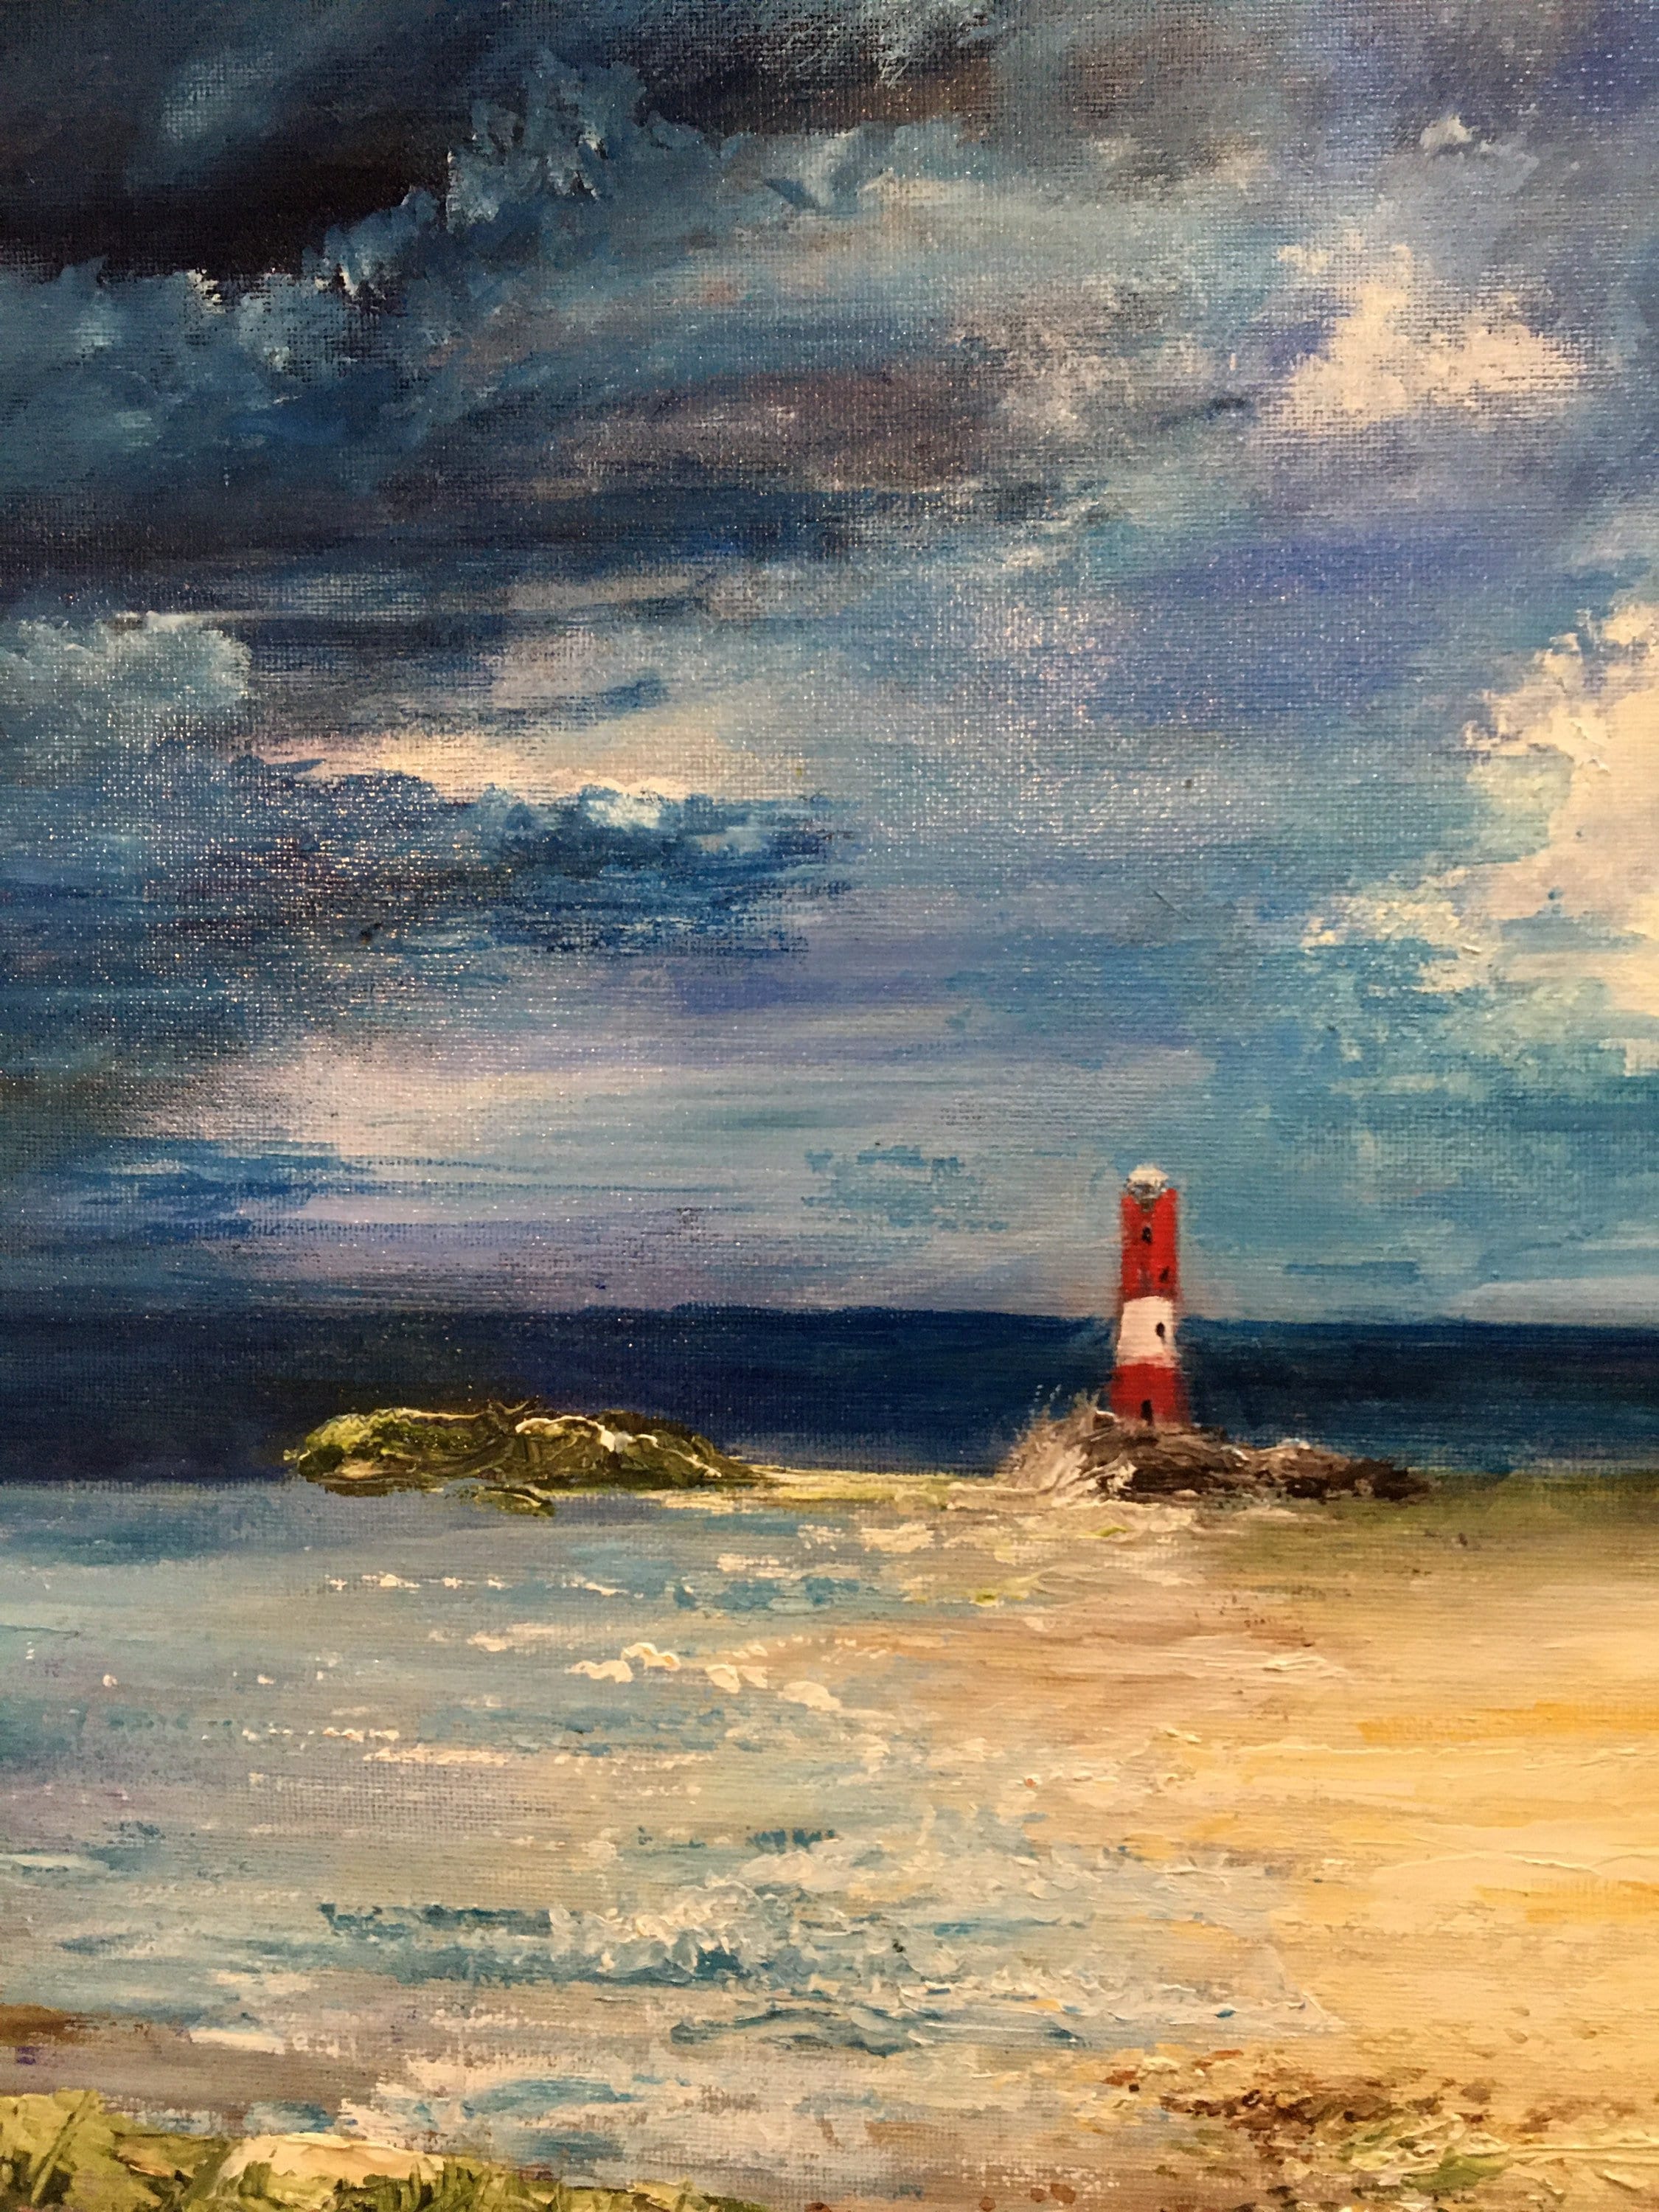 Storm And Lighthouse Original Oil Painting 16 By 20 Inches By Etsy Uk